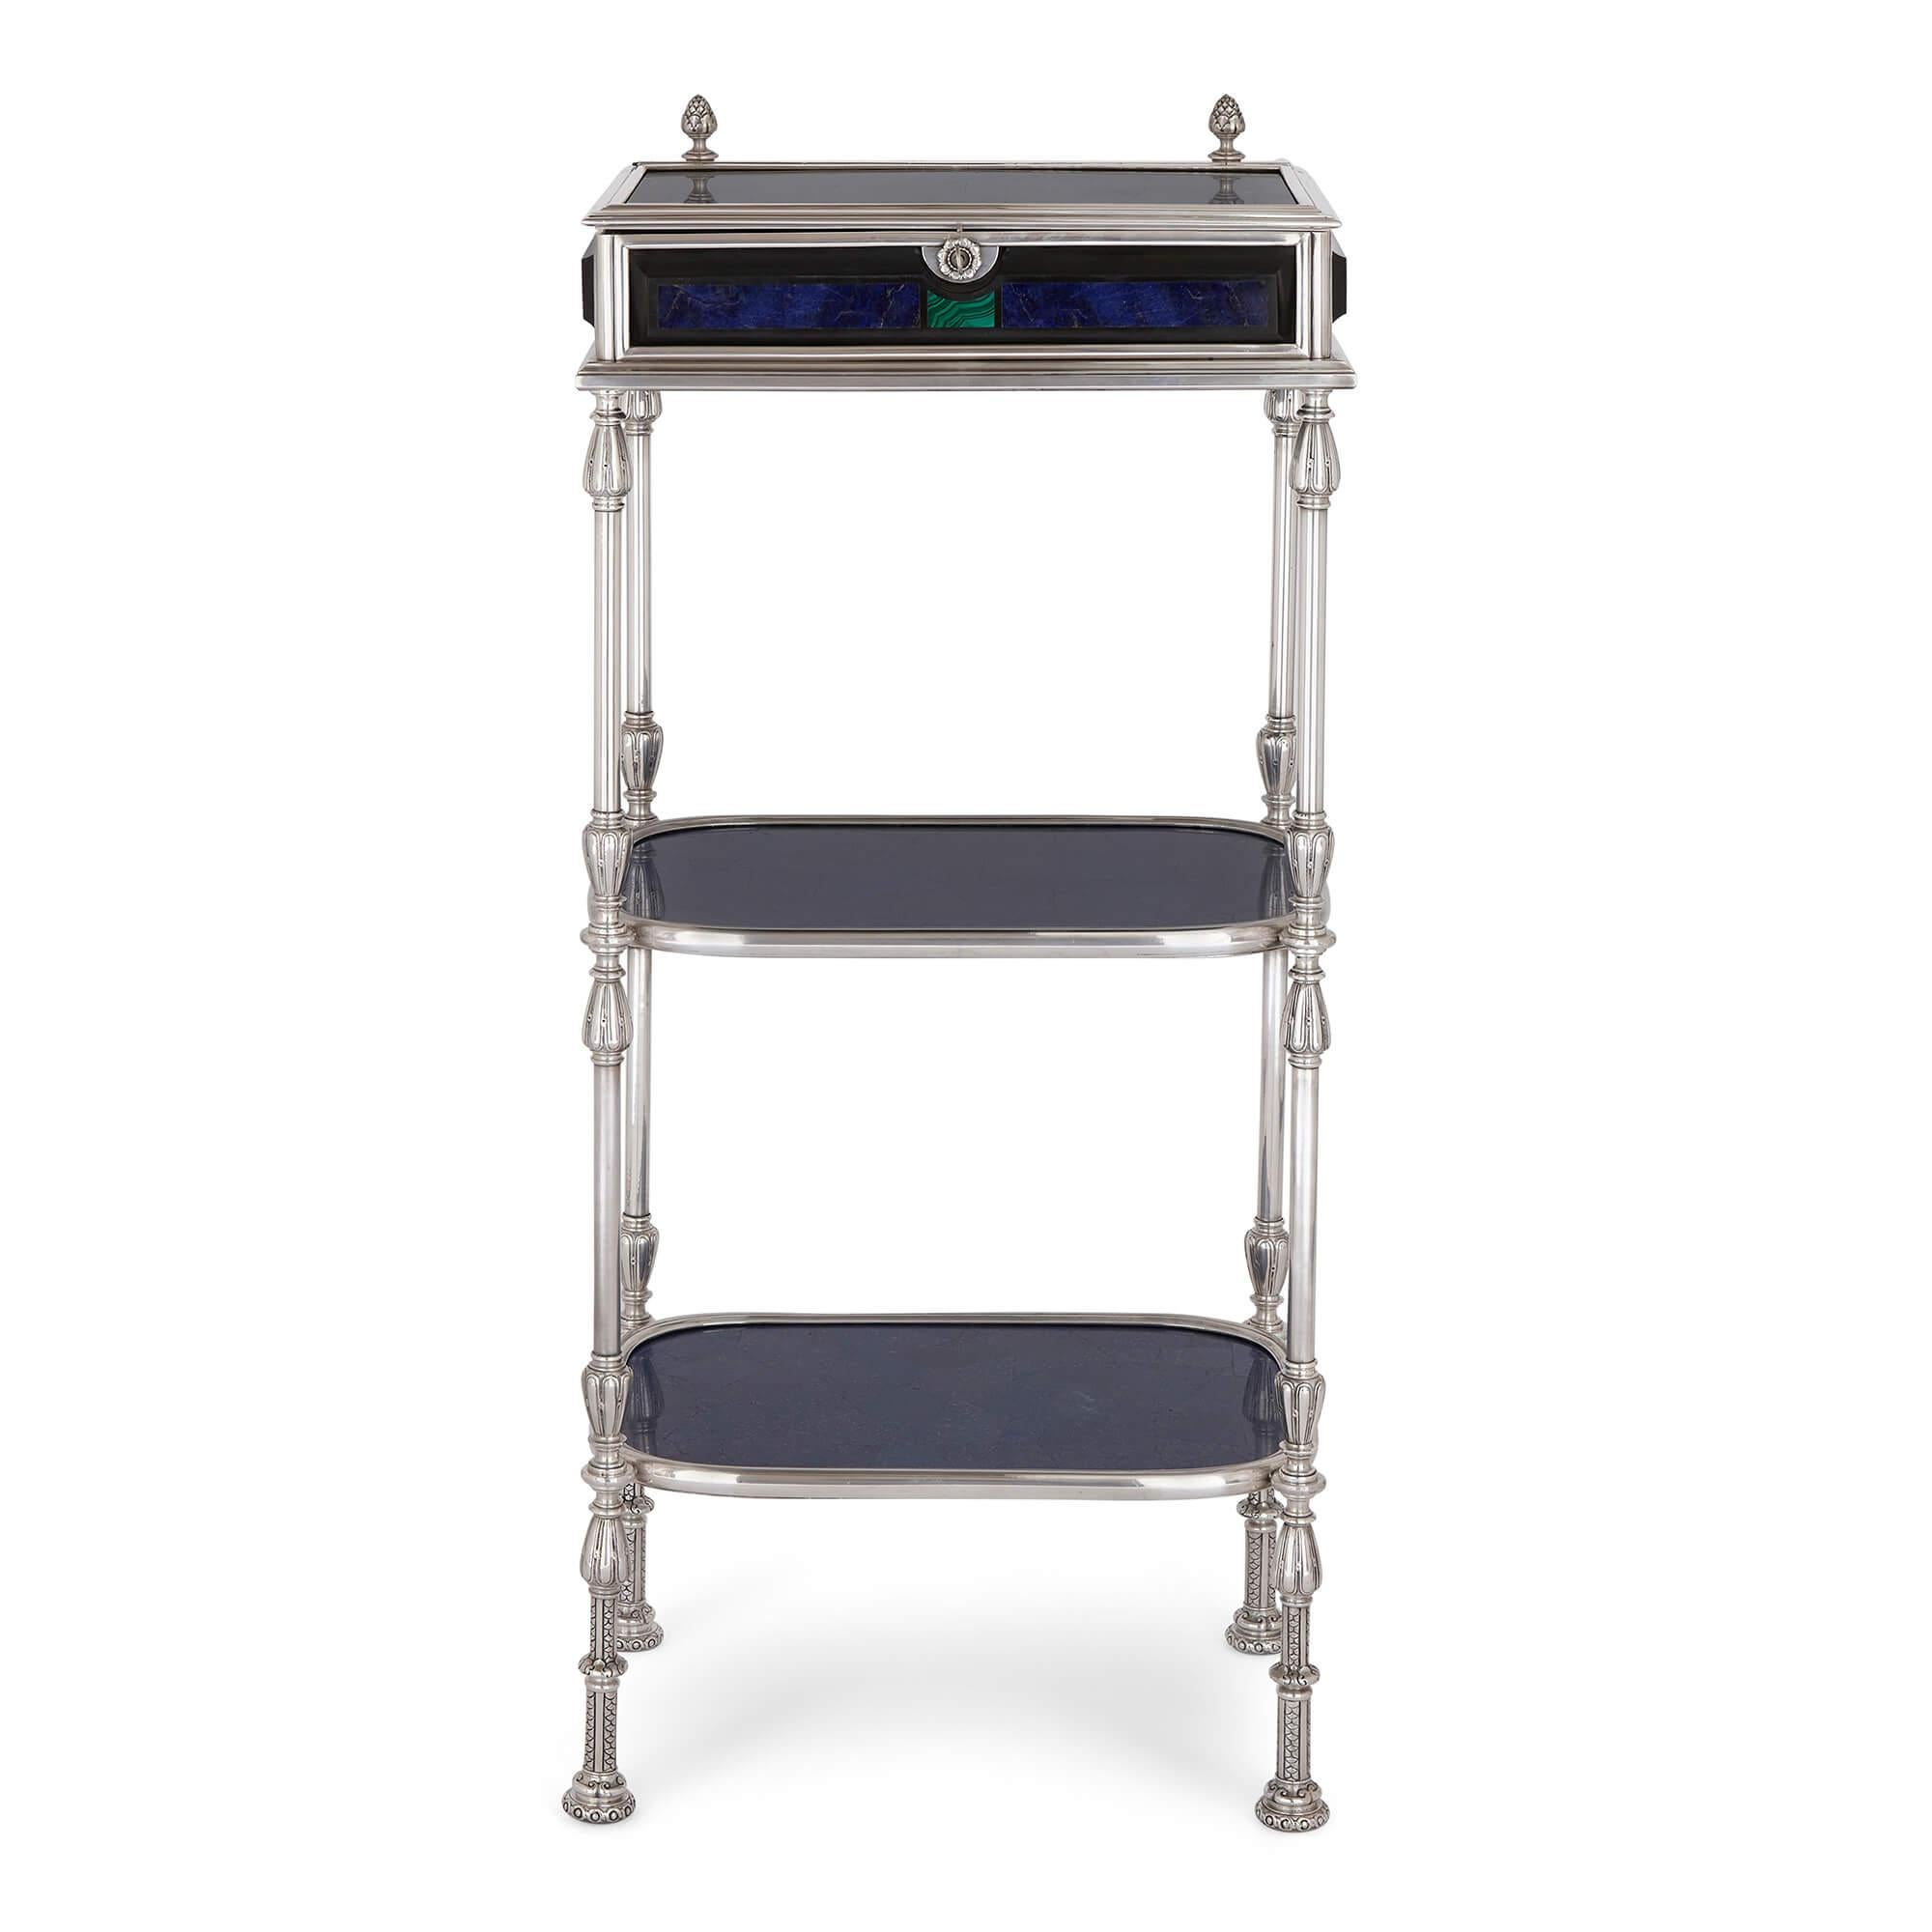 Lapis lazuli, malachite and silvered bronze étagère jewellery case table
Italian, 19th Century 
Height 95cm, width 41cm, depth 29cm

The finest materials have been used to craft this superb antique étagère case table. Of a rectangular frame, the